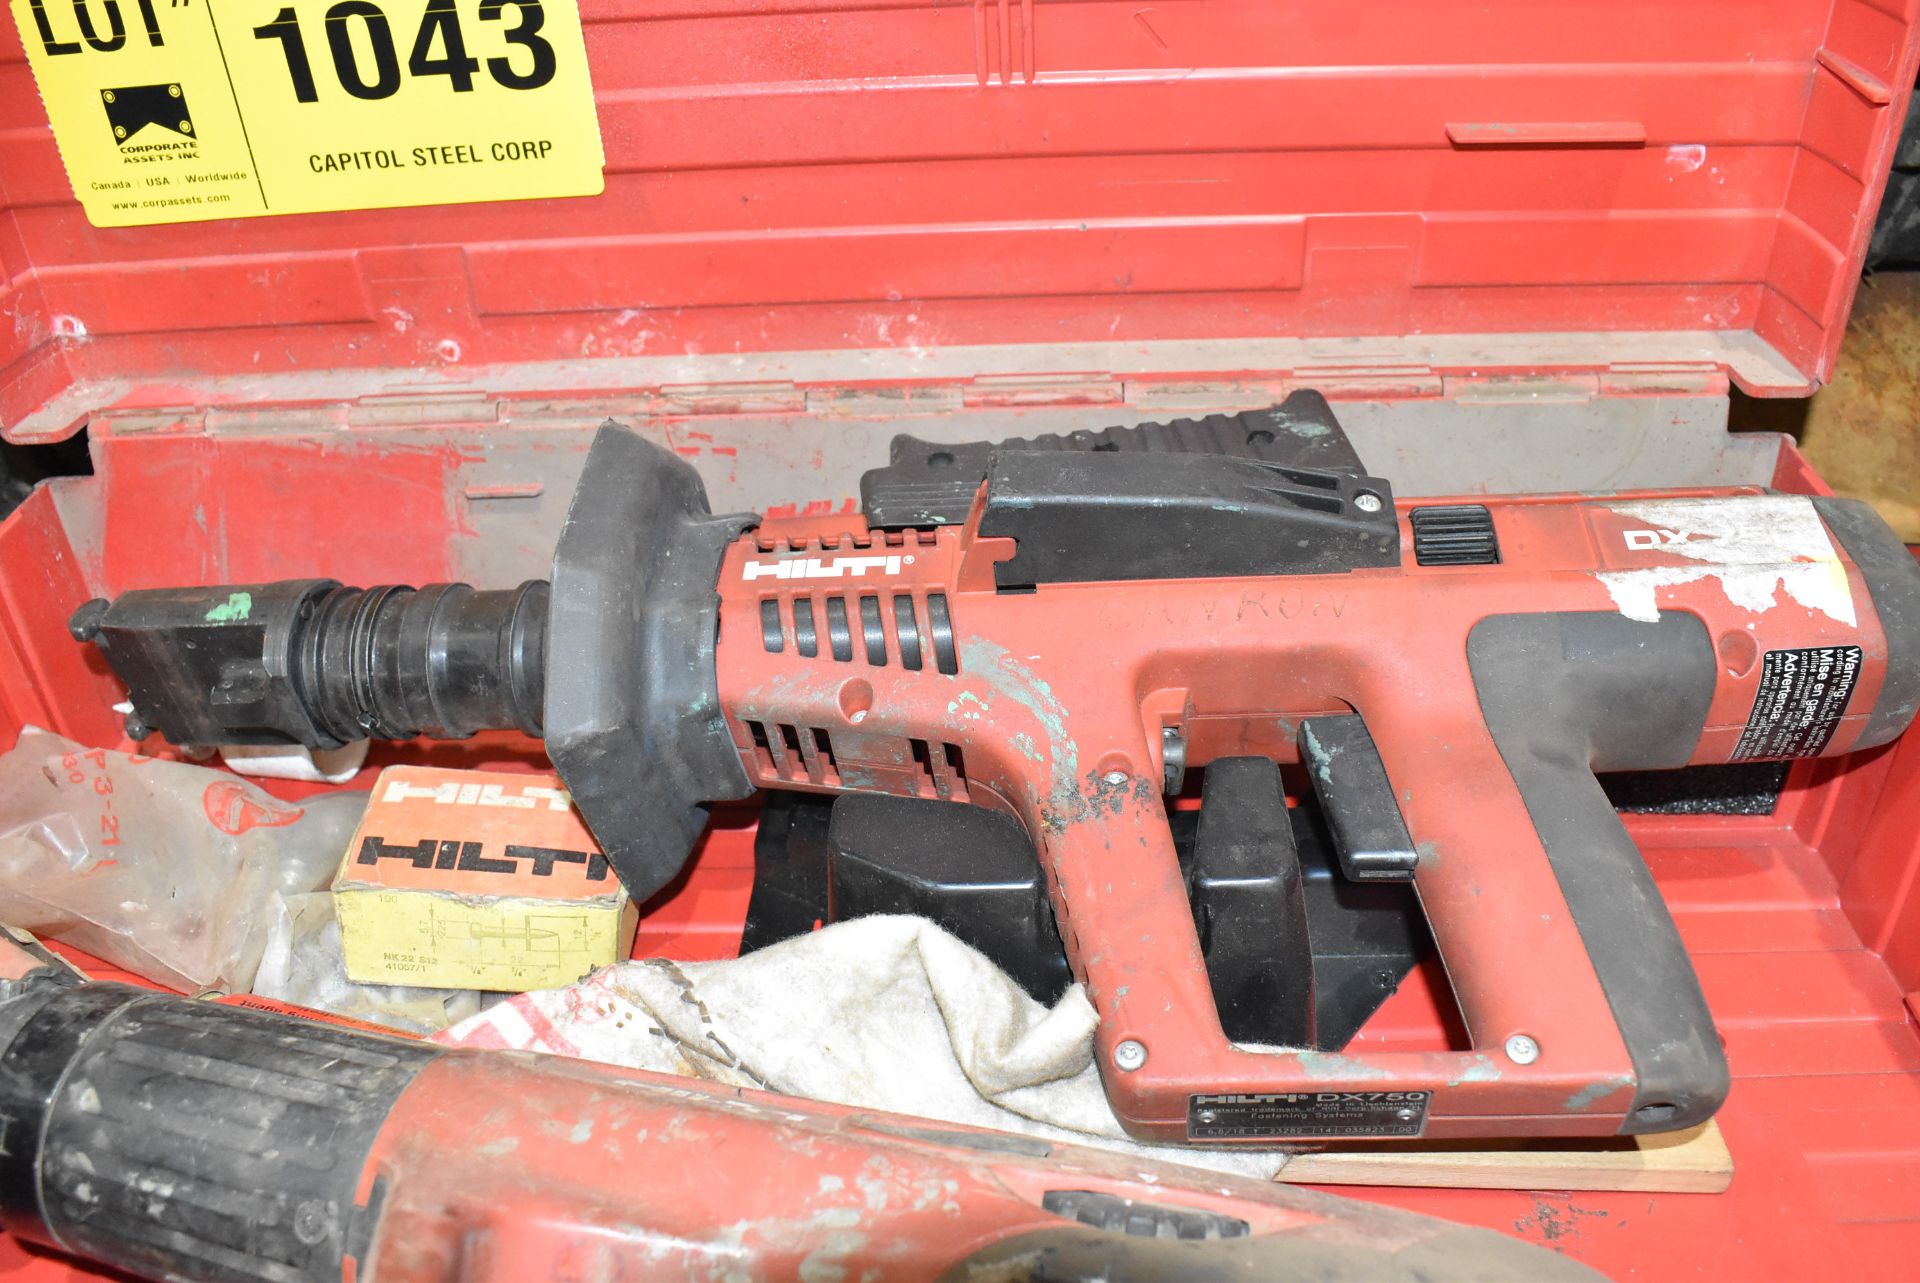 LOT/ HILTI DX460 FULLY AUTOMATIC POWER-ACTUATED FASTENING TOOL WITH HILTI MX72 NAIL MAGAZINE & HILTI - Image 5 of 6